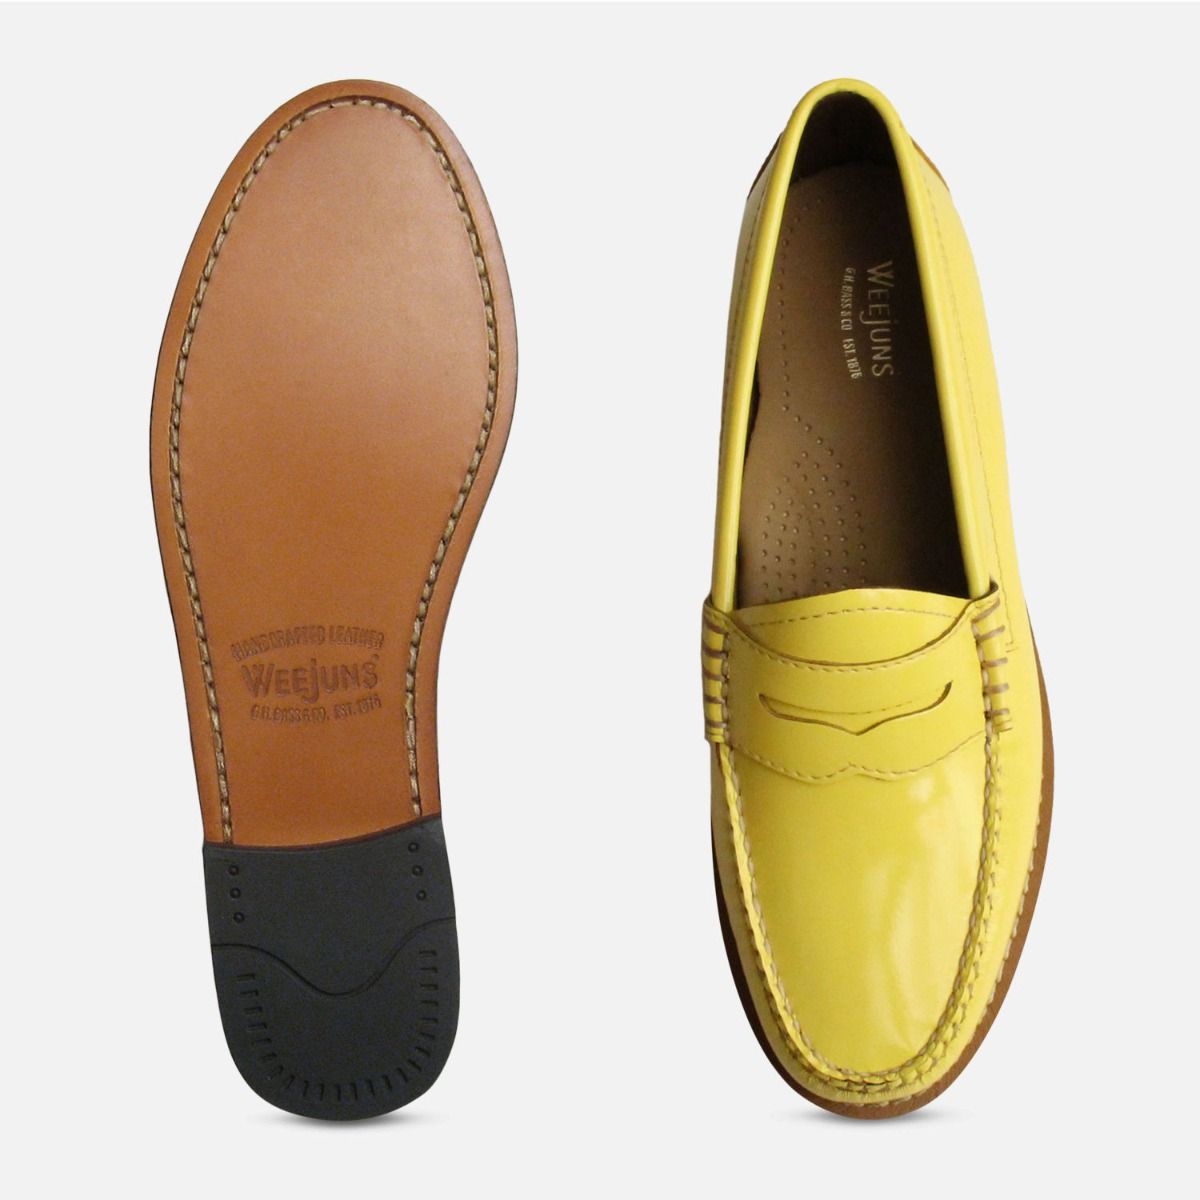 yellow patent leather shoes